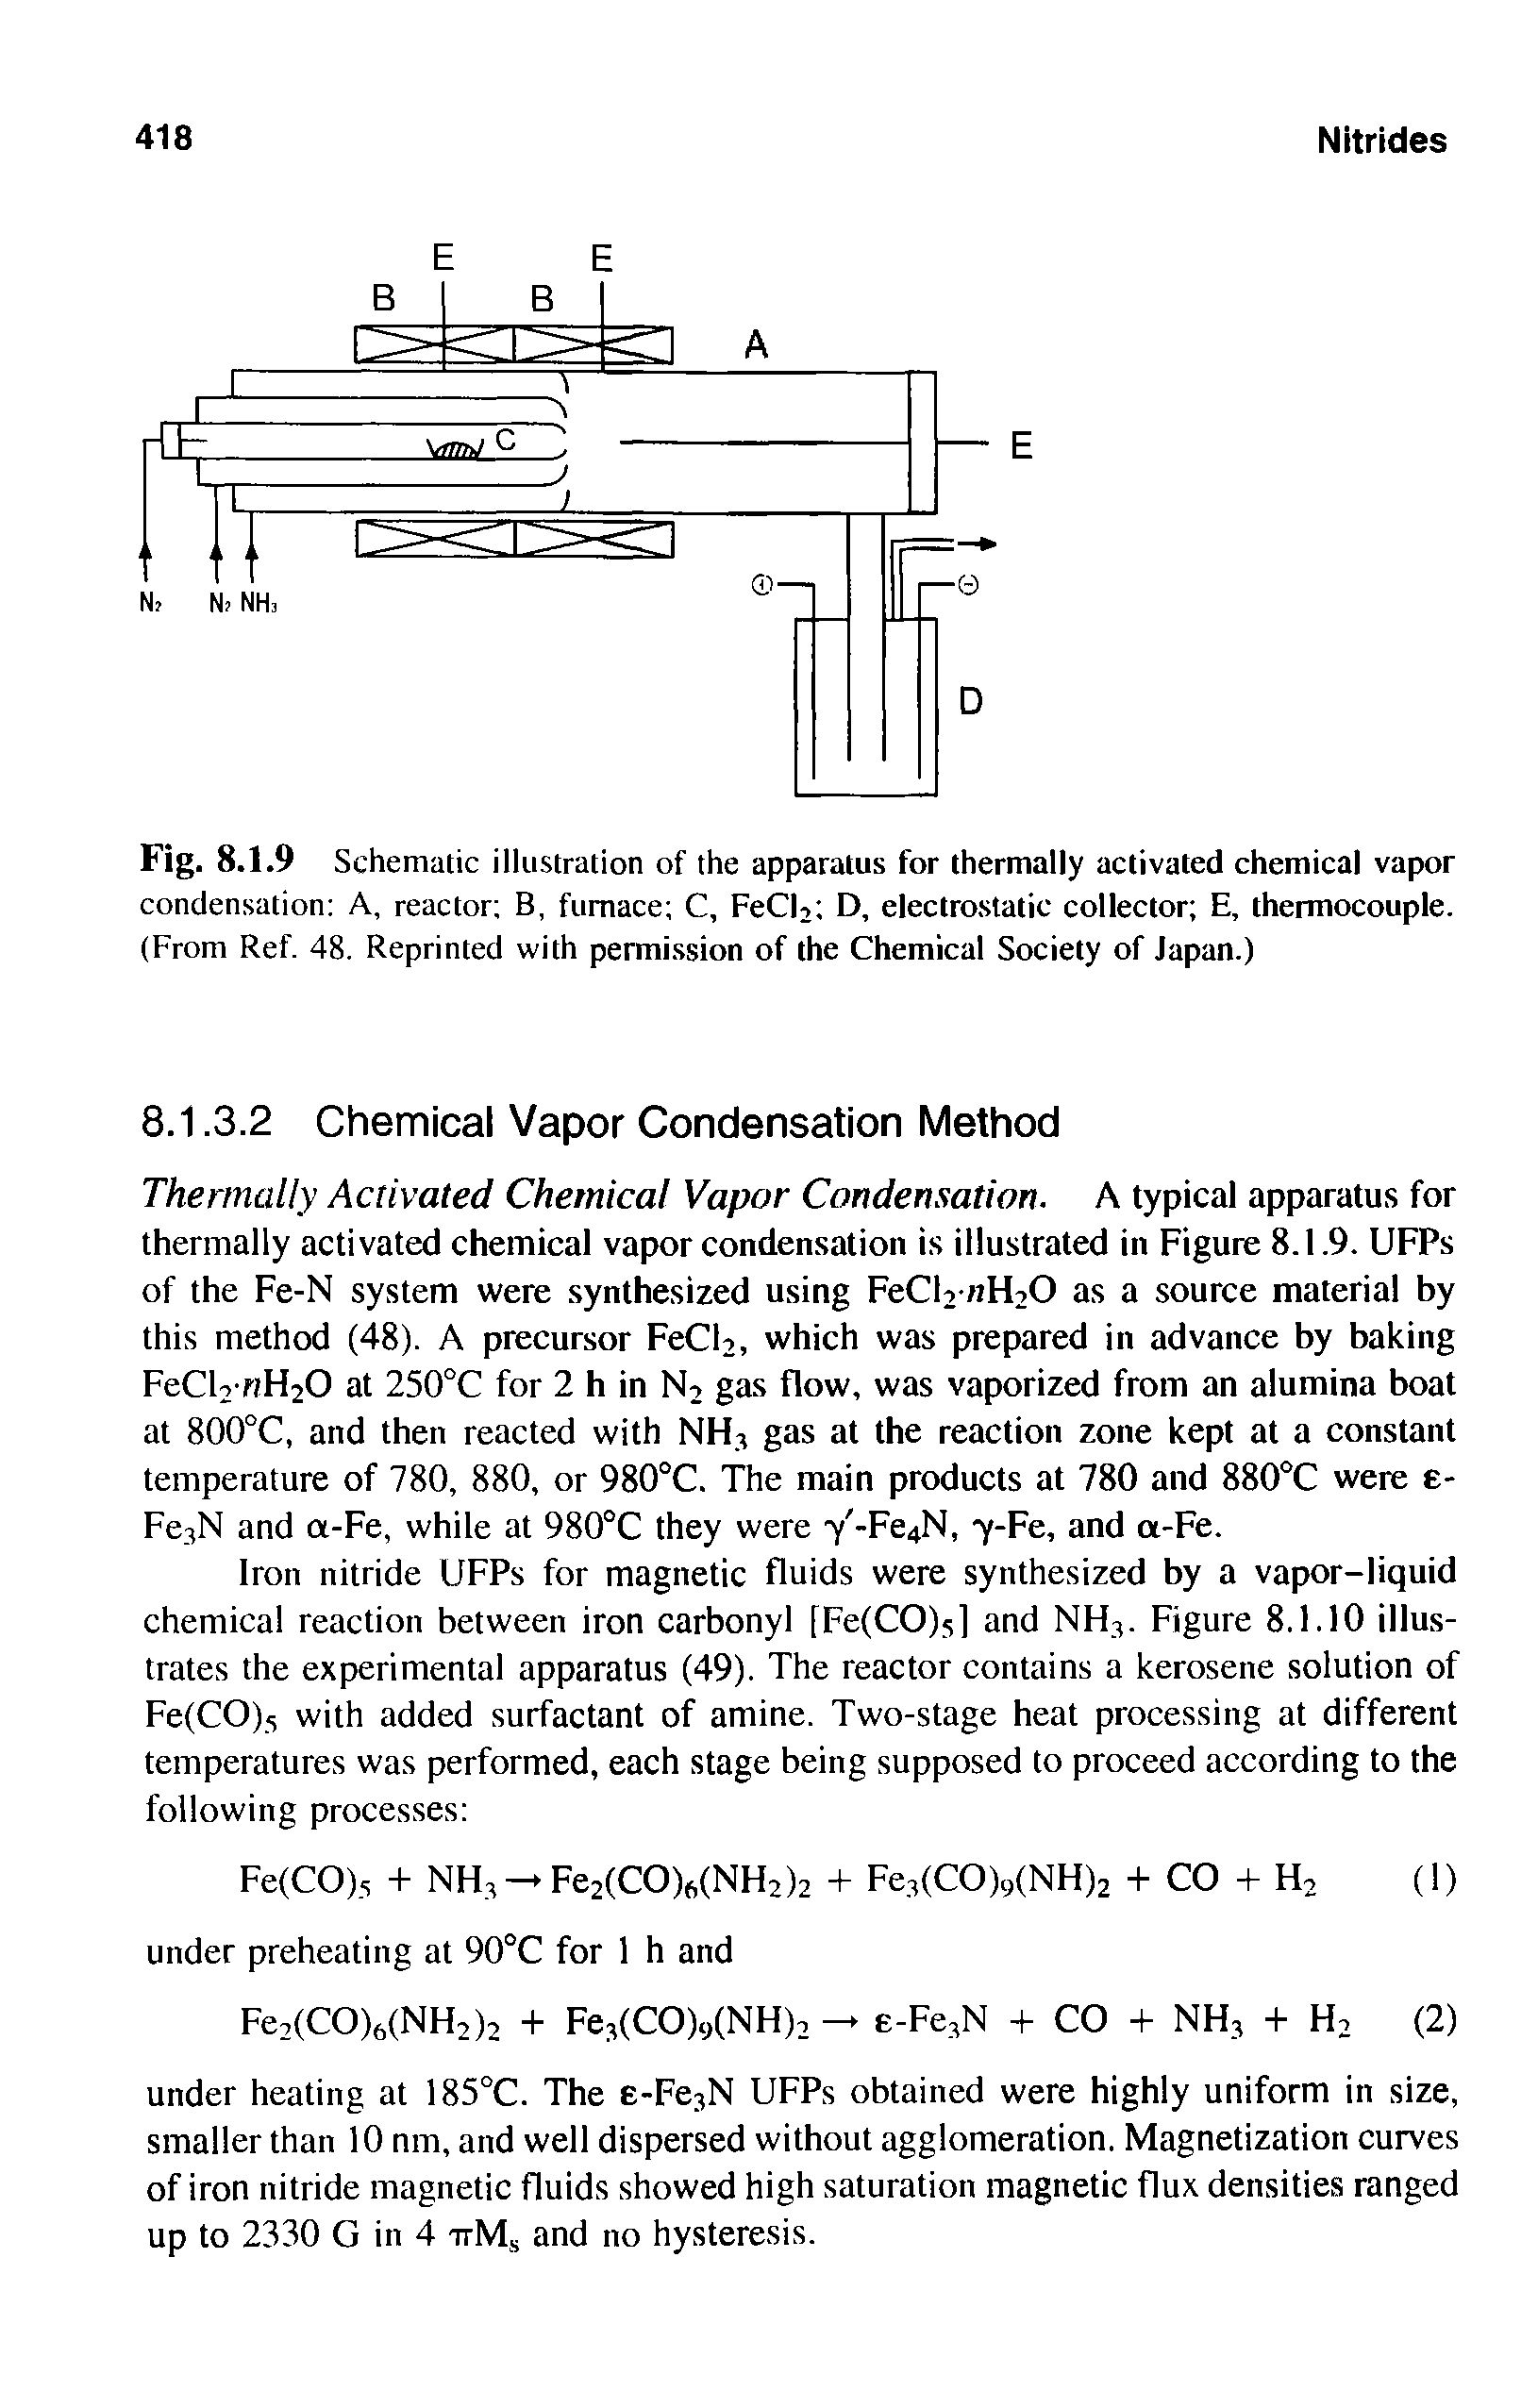 Fig. 8.1.9 Schematic illustration of the apparatus for thermally activated chemical vapor condensation A, reactor B, furnace C, FeCE D, electrostatic collector E, thermocouple. (From Ref. 48. Reprinted with permission of the Chemical Society of Japan.)...